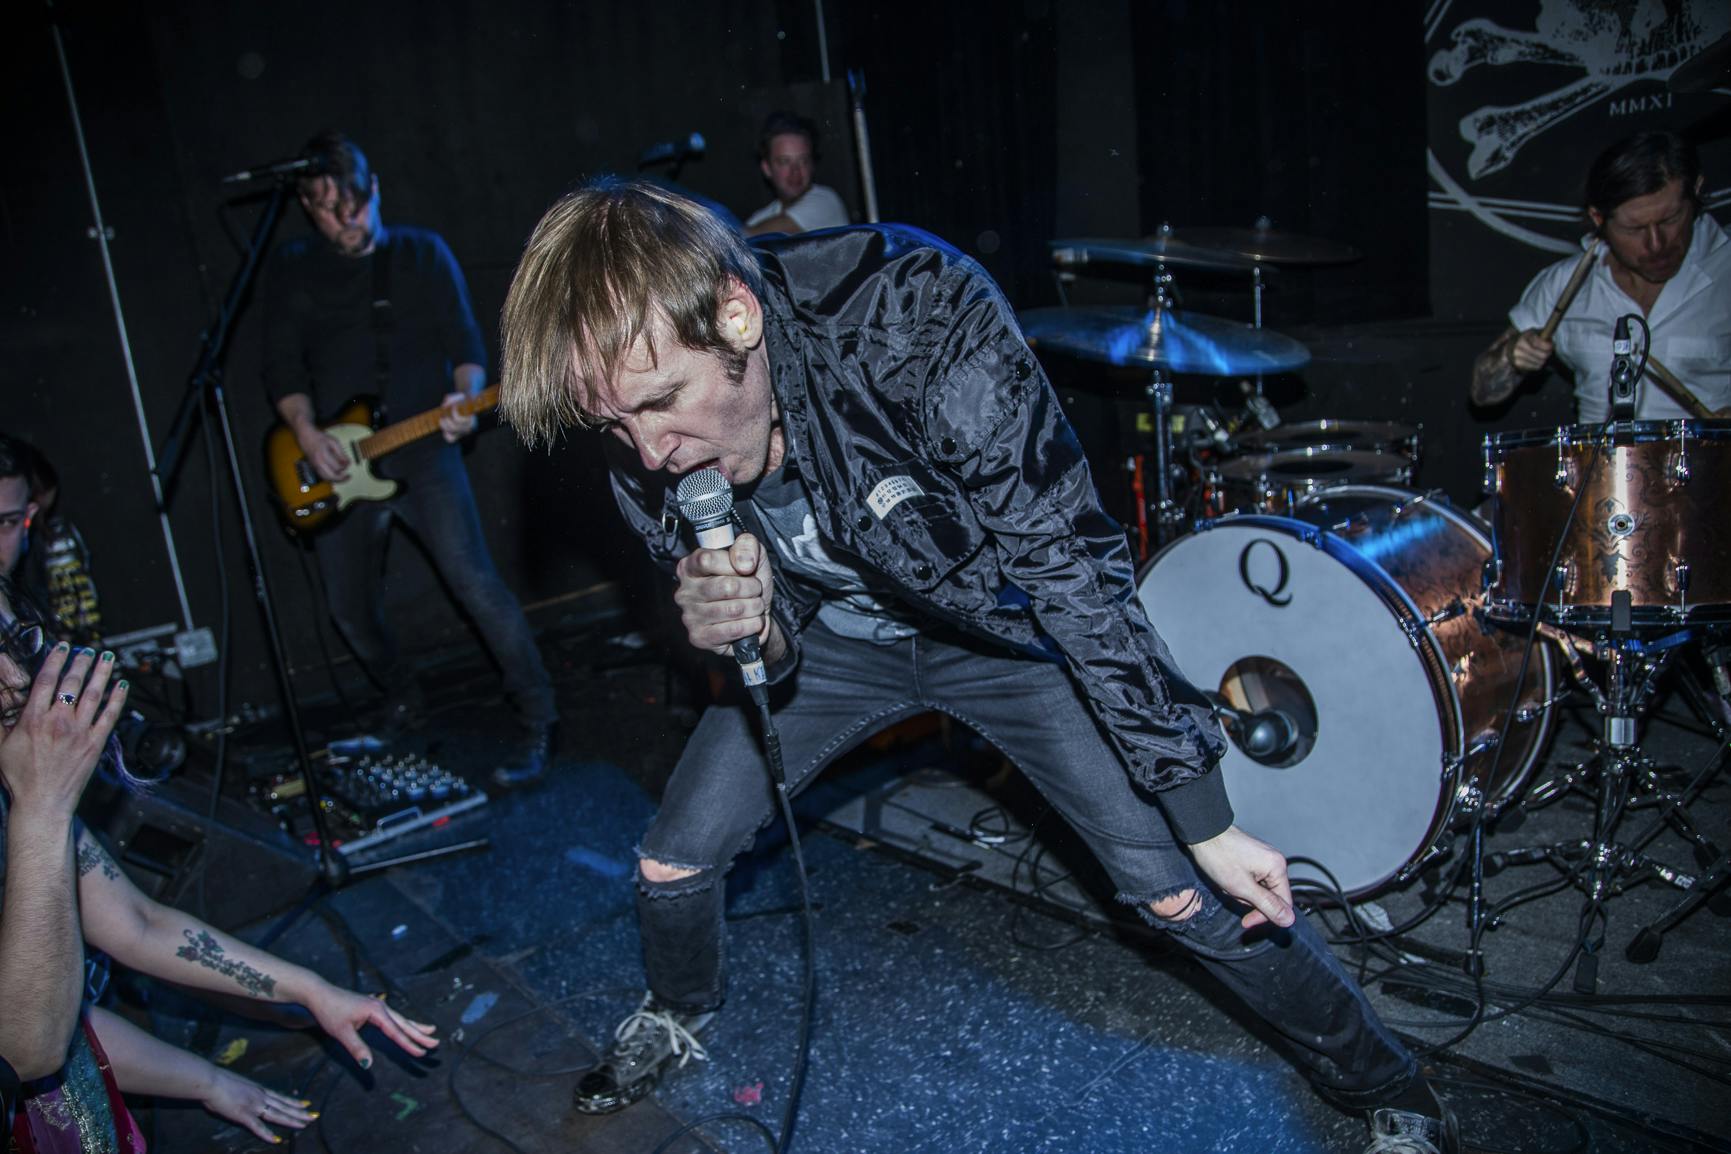 Thursday's Geoff Rickly To Open For Frank Iero On Upcoming U.S. Tour